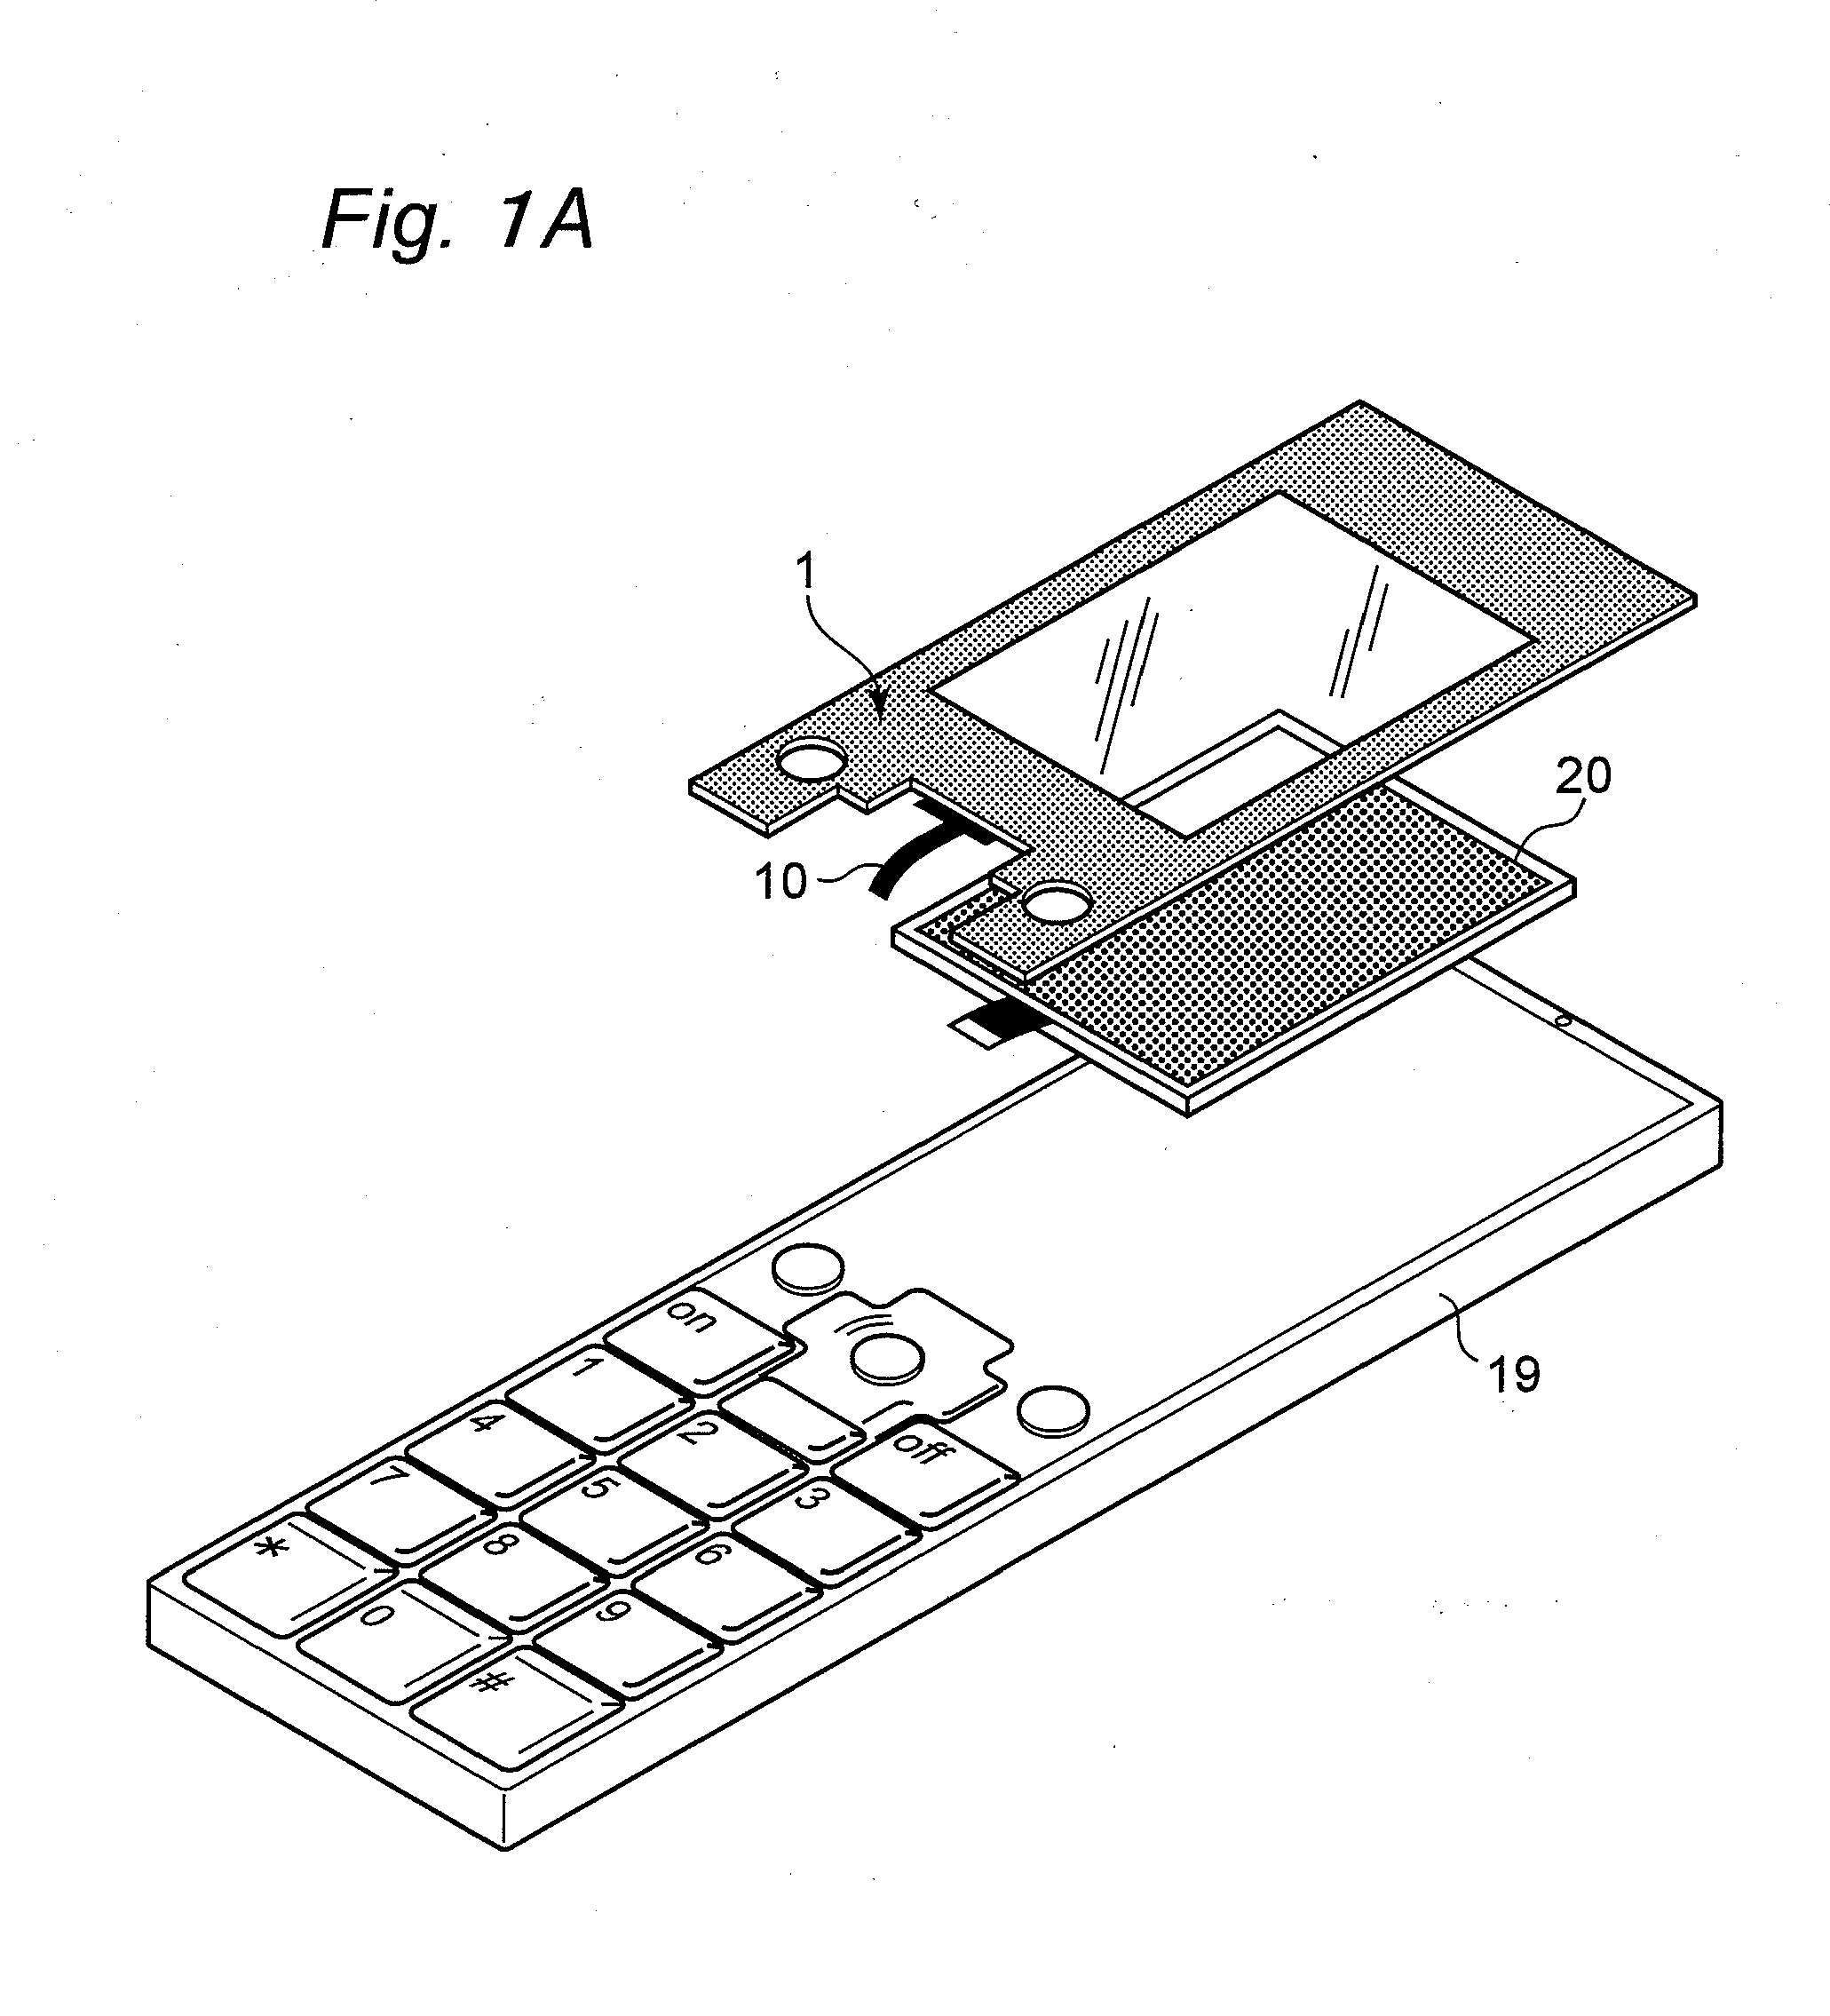 PROTECTIVE PANEL WITH TOUCH INPUT FUNCTION SUPERIOR IN SURFACE FLATNESS AND ELECTRONIC APPARATUS HAVING THE PROTECTIVE PANEL (amended